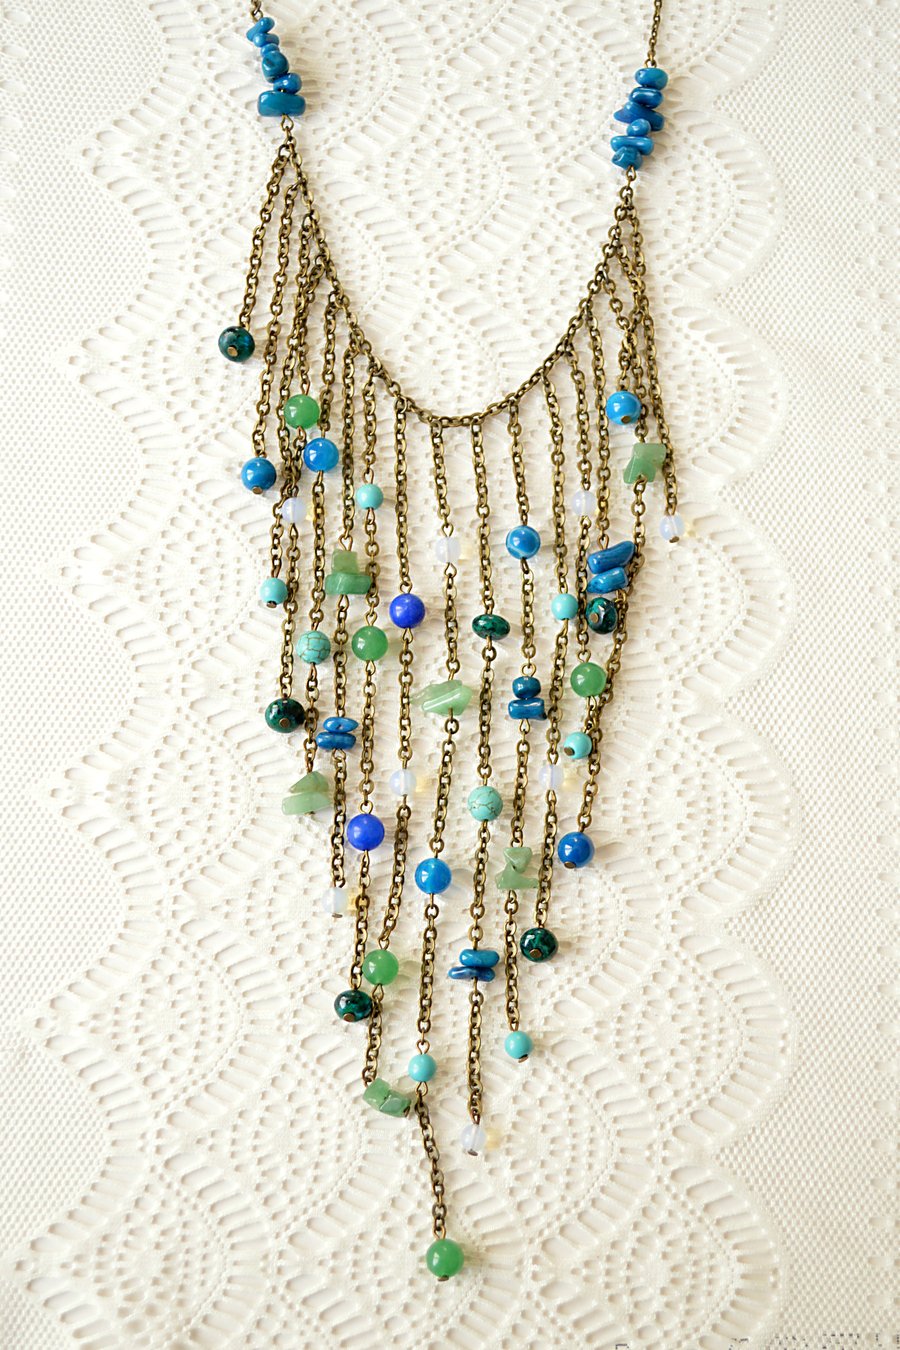 Statement Waterfall Necklace in Shades of Blue ... - Folksy